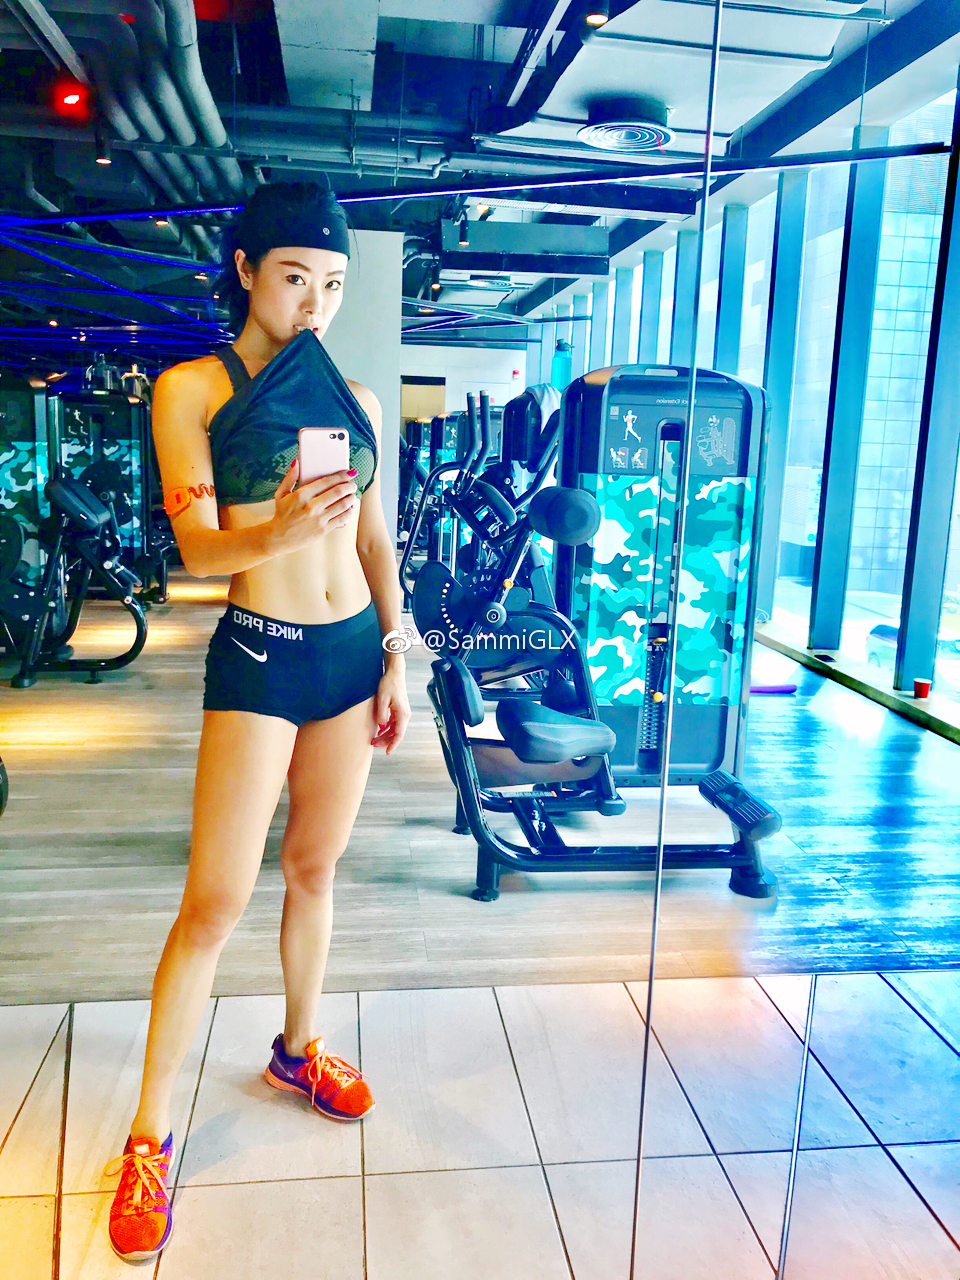 Audemars Piguet and Elle China, and yet others post workout in Nike attire or brunching in Shanghai